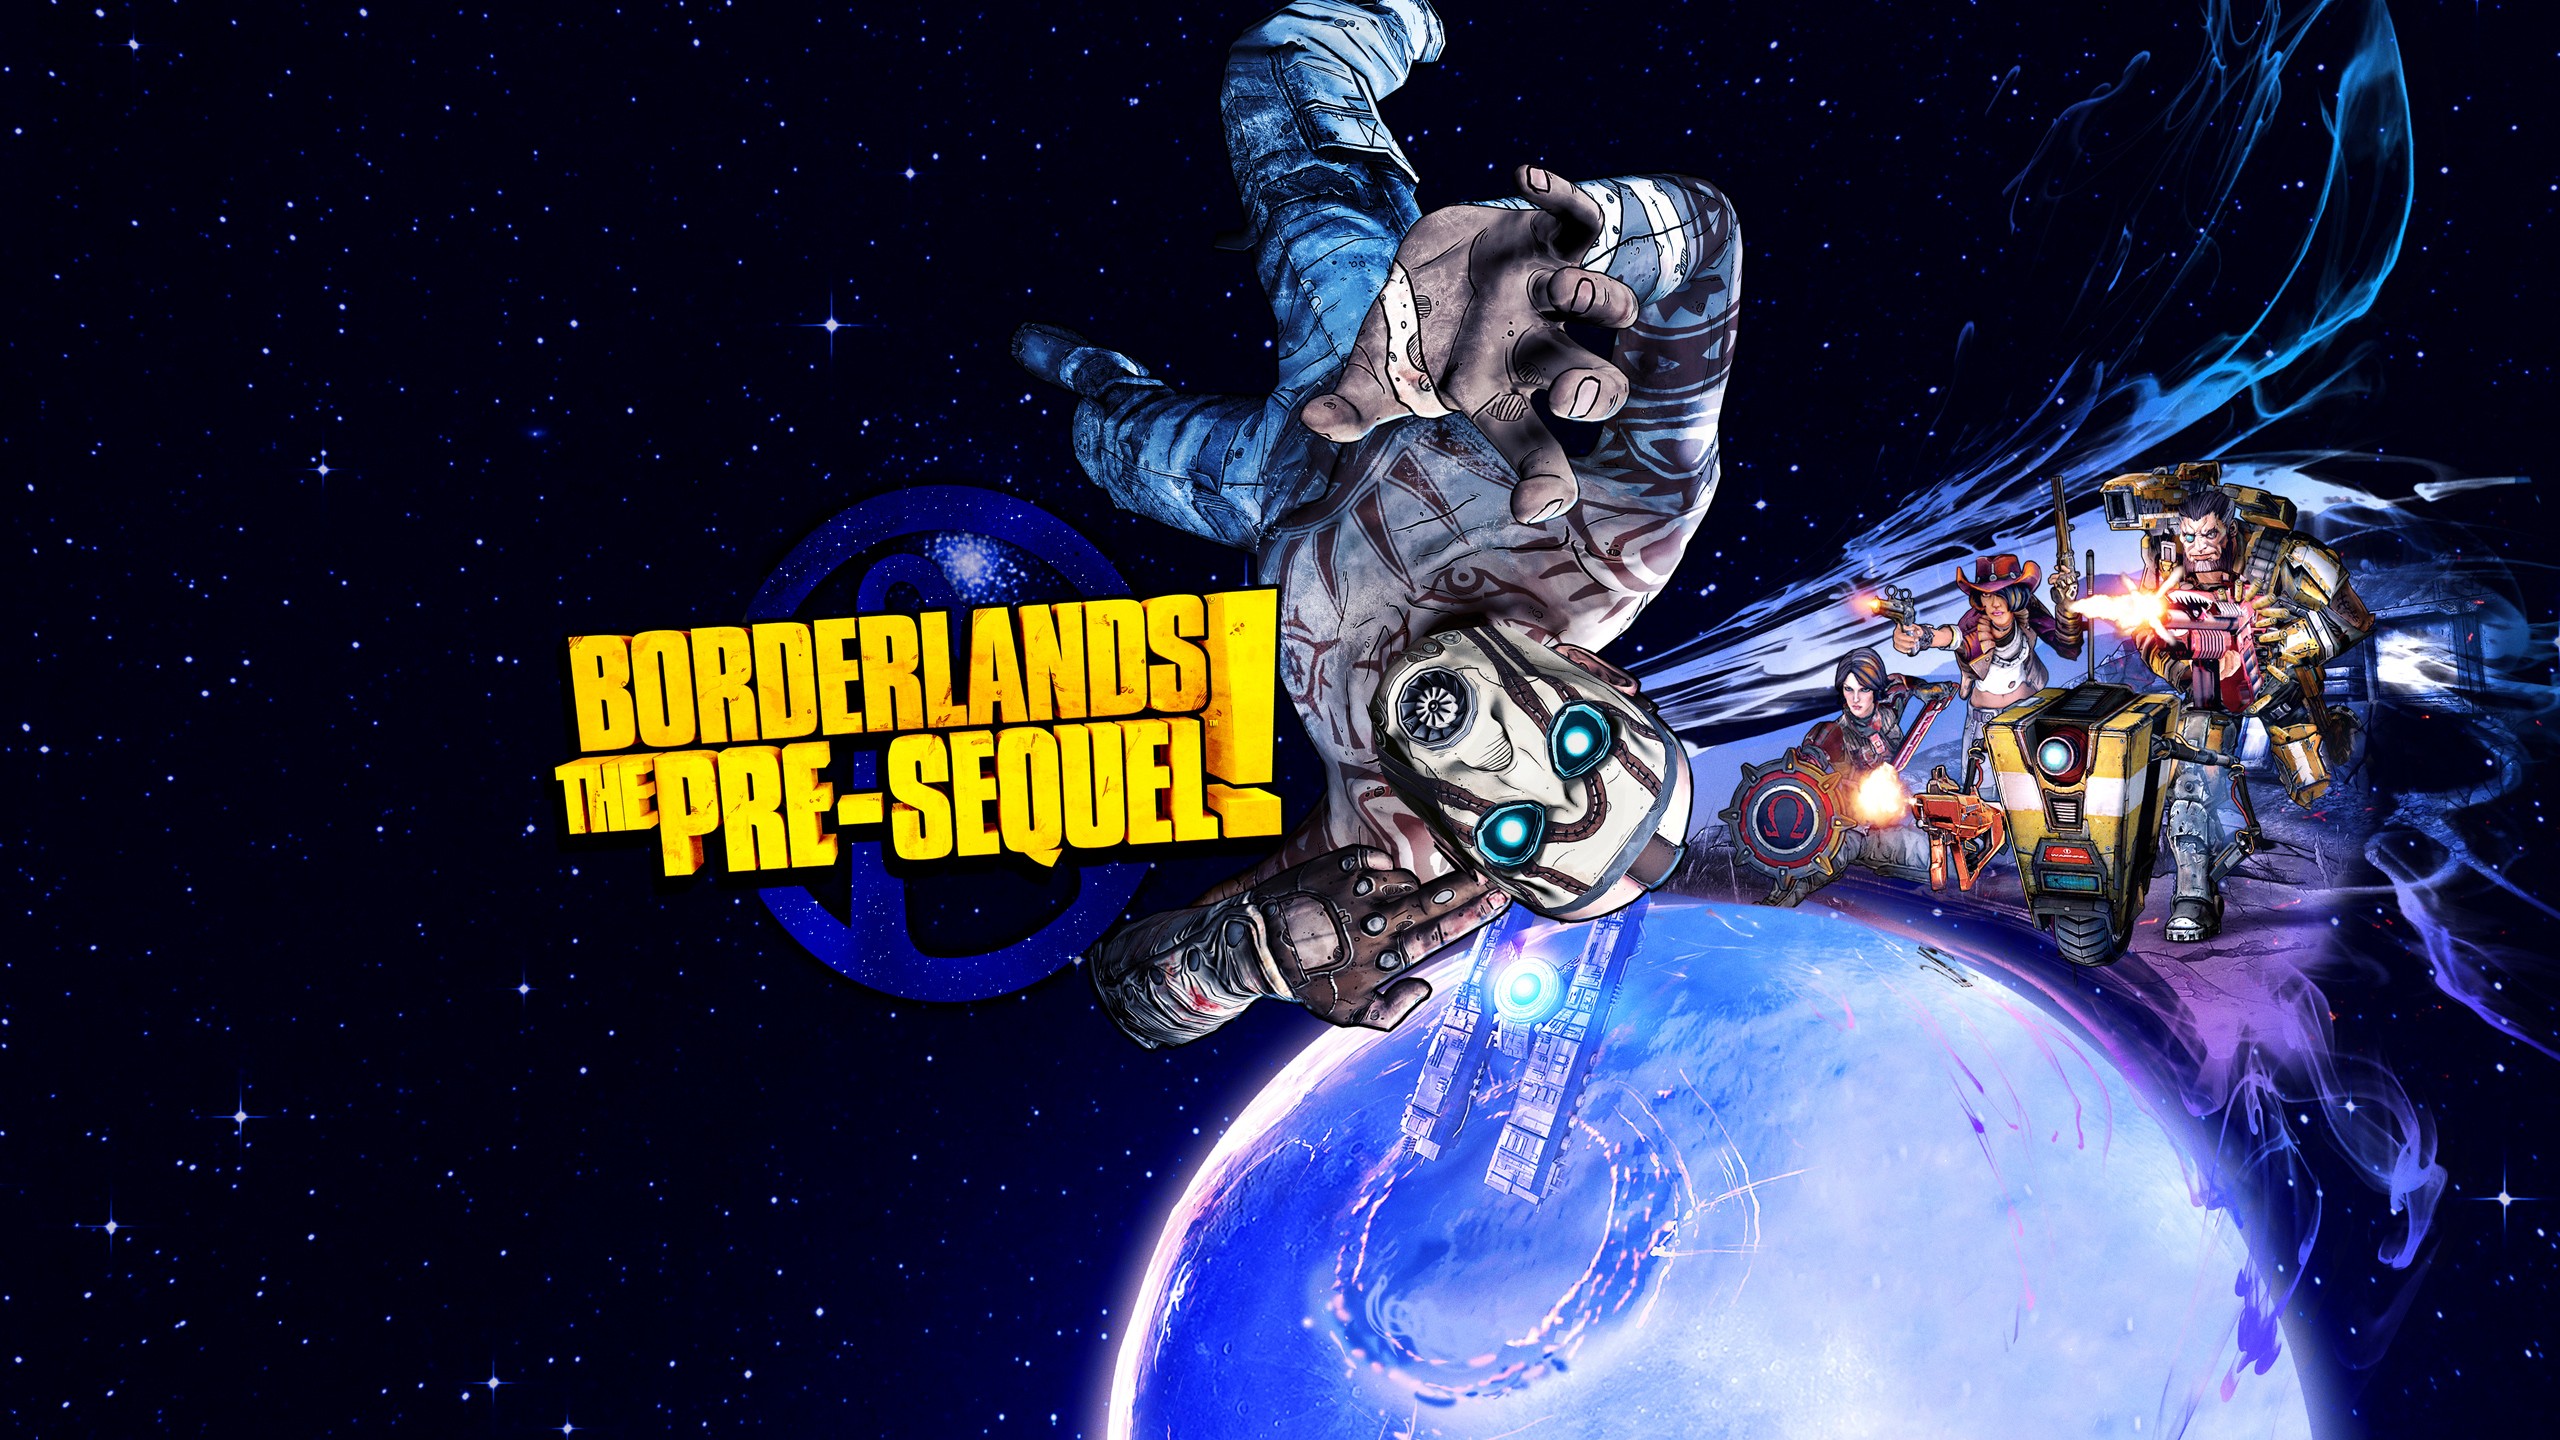 General 2560x1440 Borderlands 2 Borderlands Borderlands: The Pre-Sequel video games PC gaming science fiction video game art planet